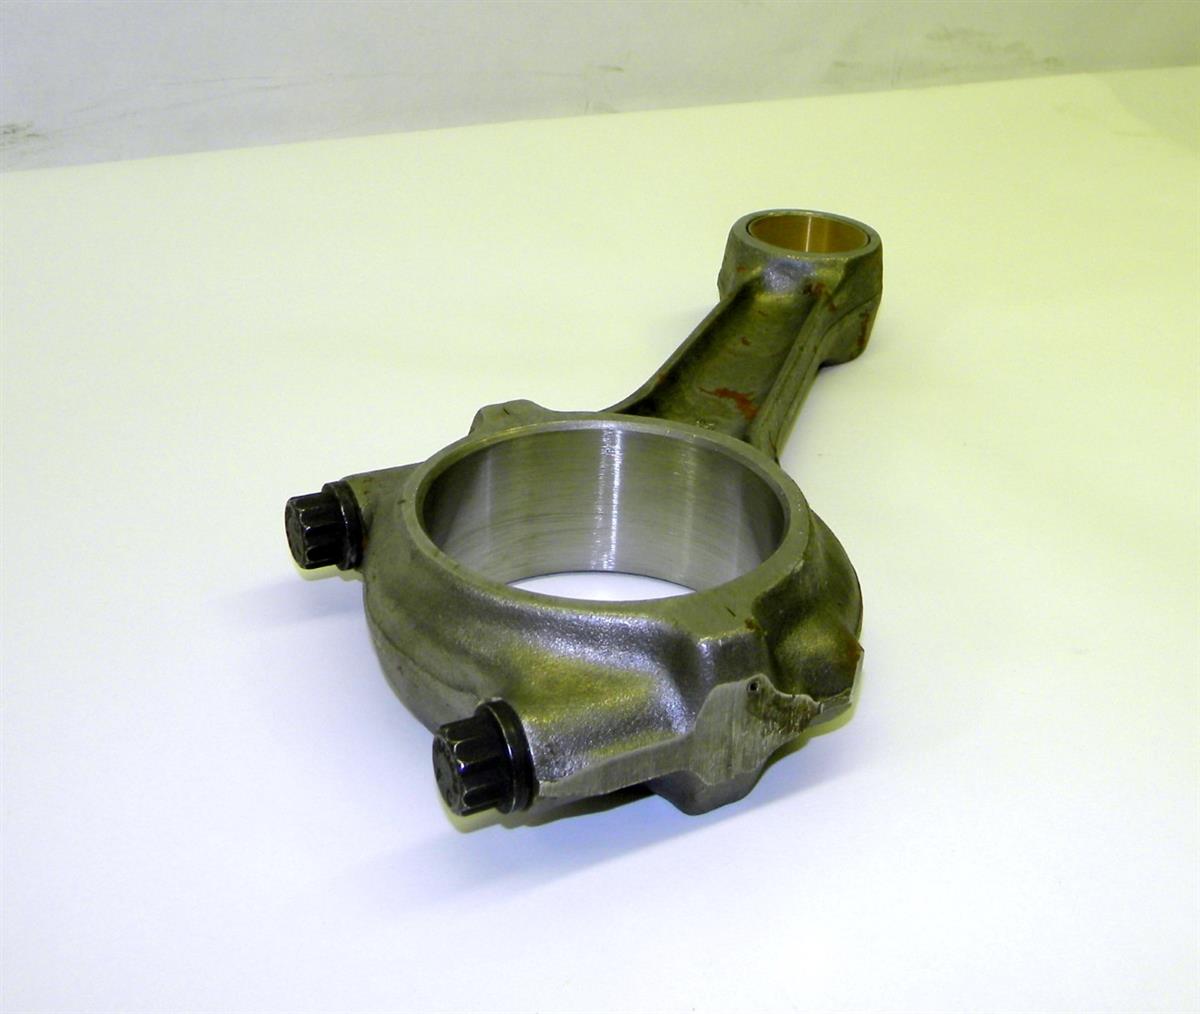 M35-228 | 2815-00-617-8625 Connecting Rod with Cap for M35A2 and M54 Series with Multifuel Engine. NOS.  (4).JPG